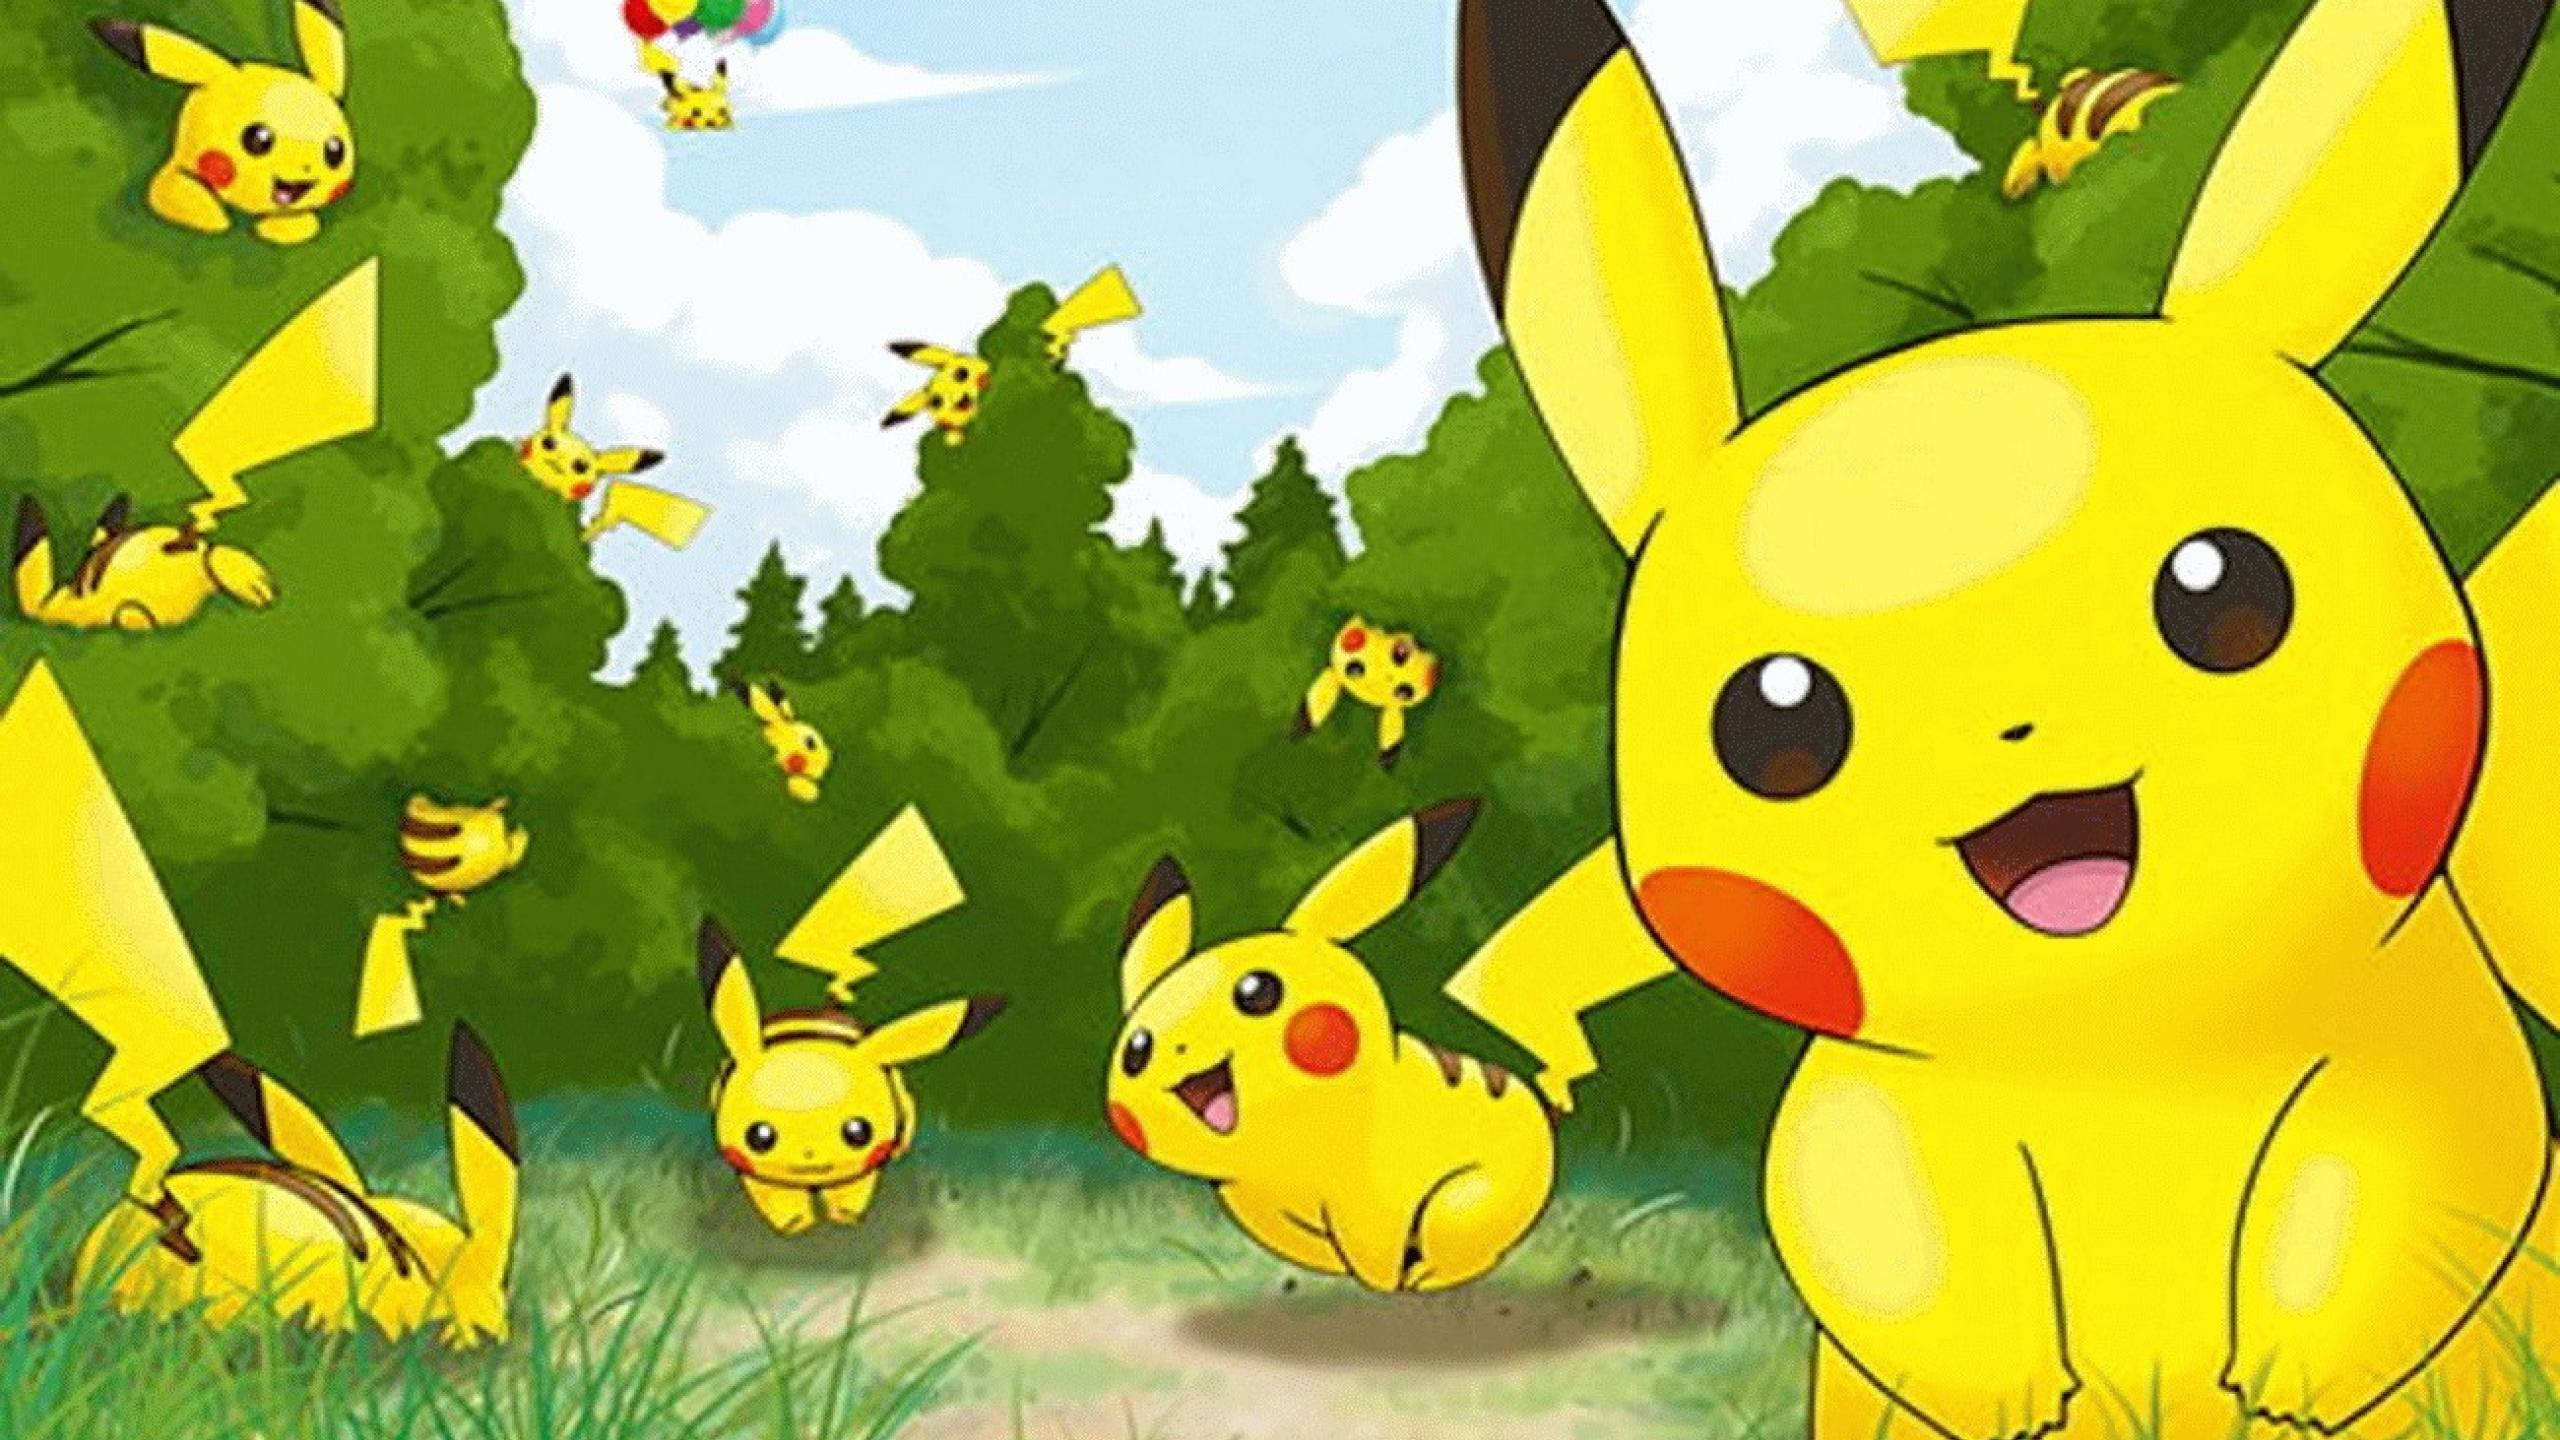 Awesome Pokemon Pikachu HD Image Wallpaper Background For Laptop